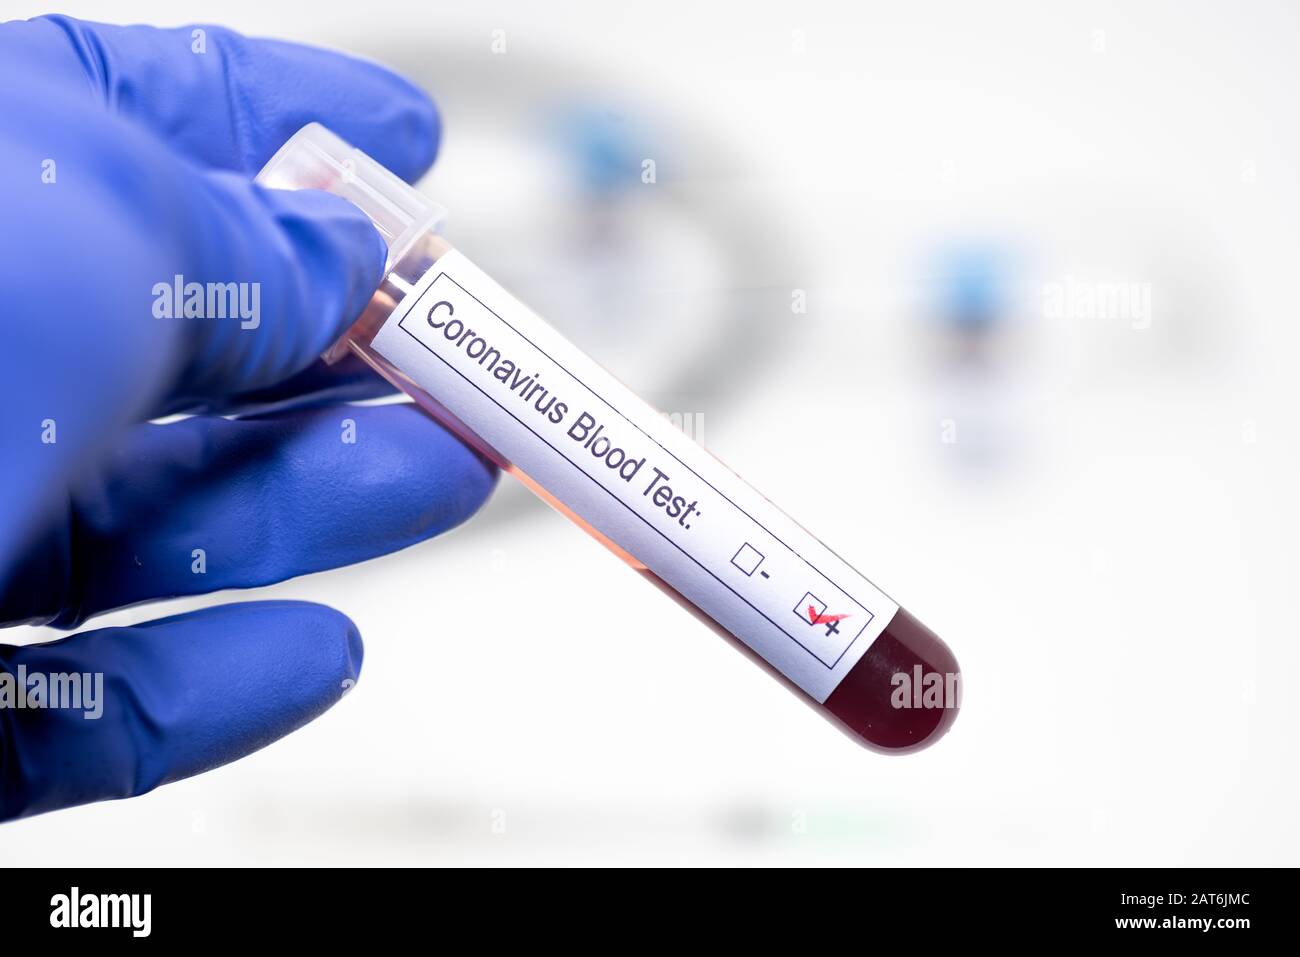 Coronavirus positive blood in a blood collection tube Stock Photo